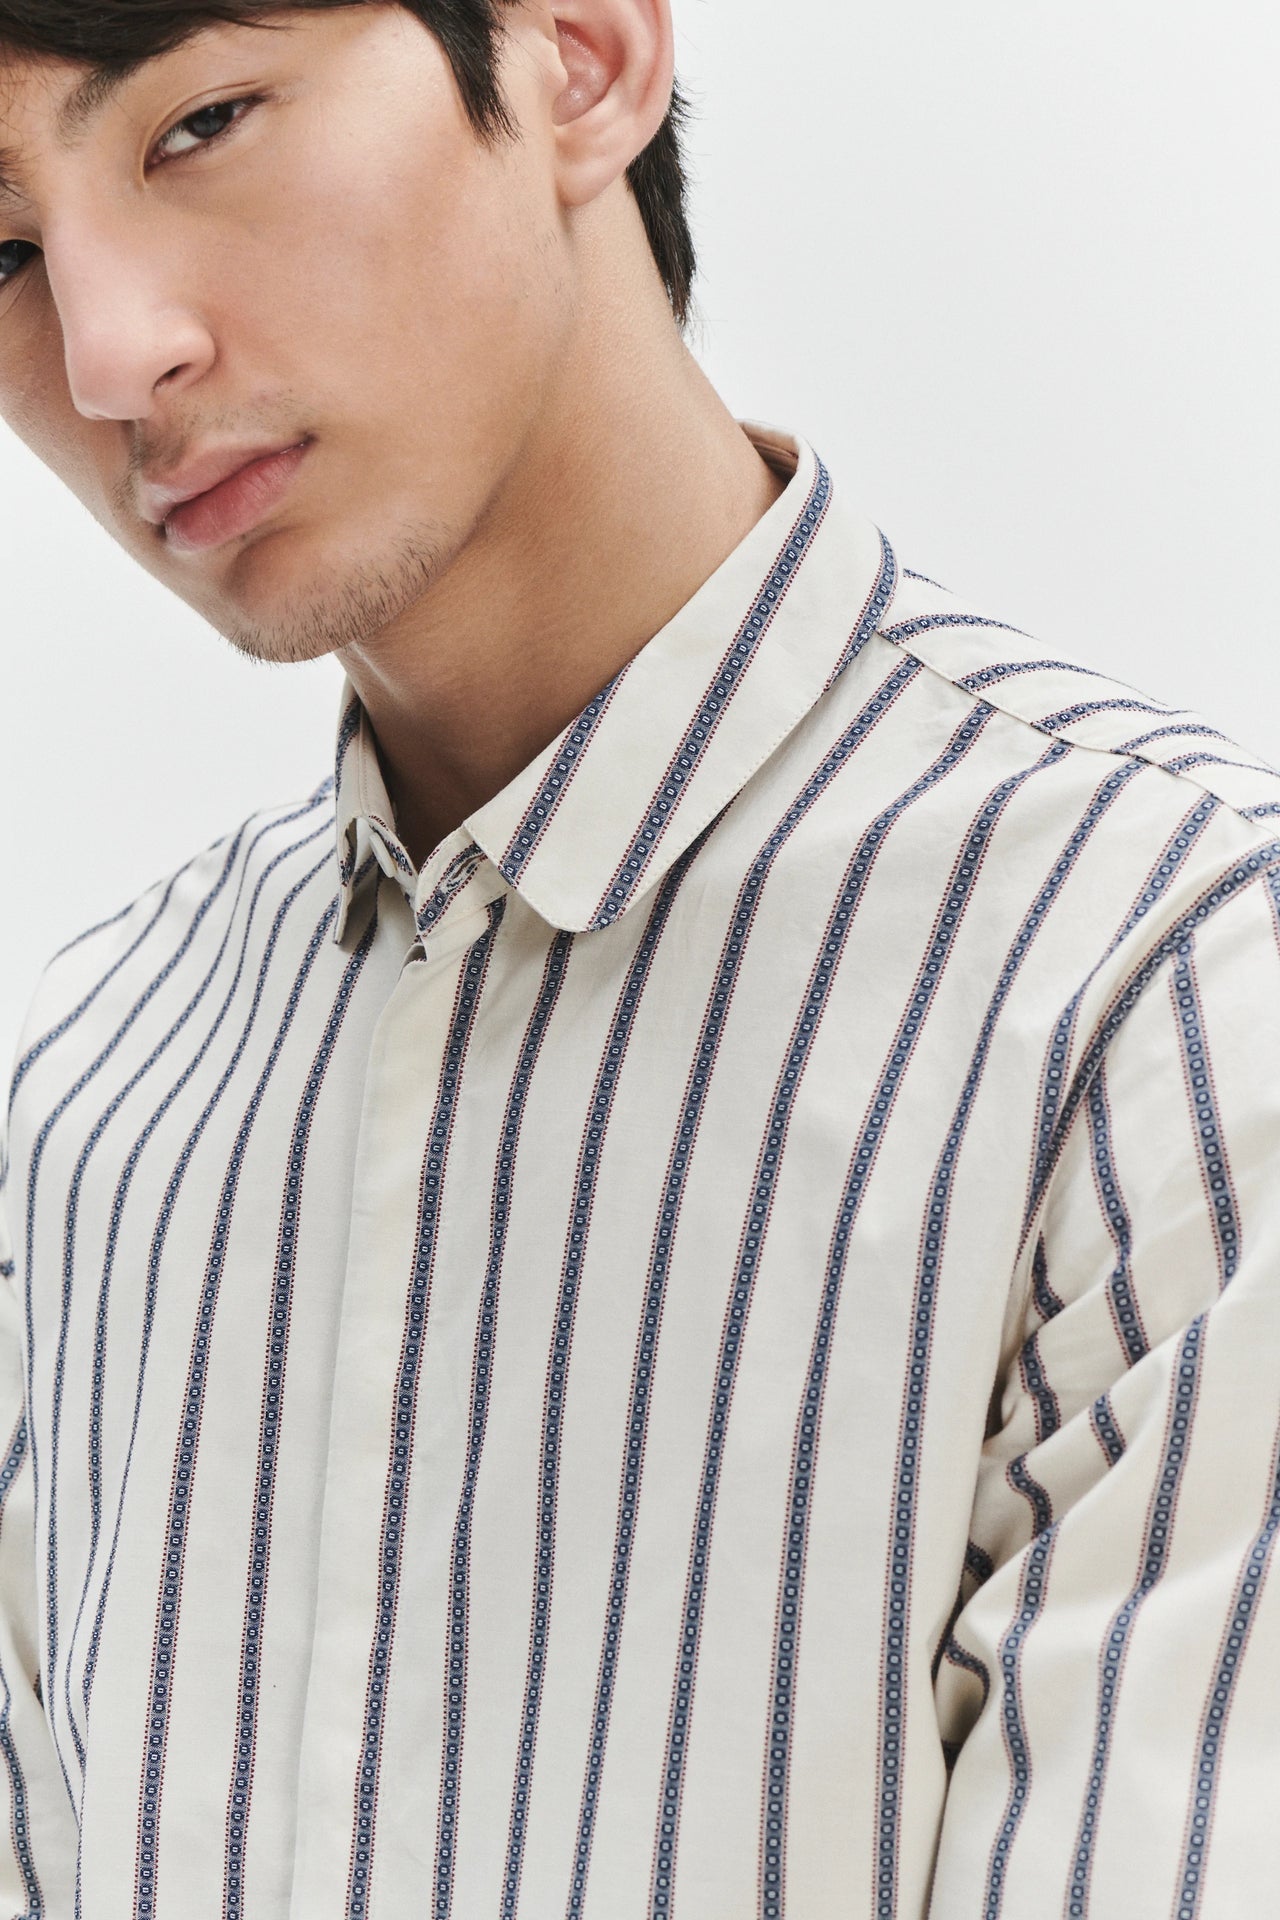 Cute Round Collar Shirt in an Ethno Inspired Blue with Red Striped White Italian Organic Cotton